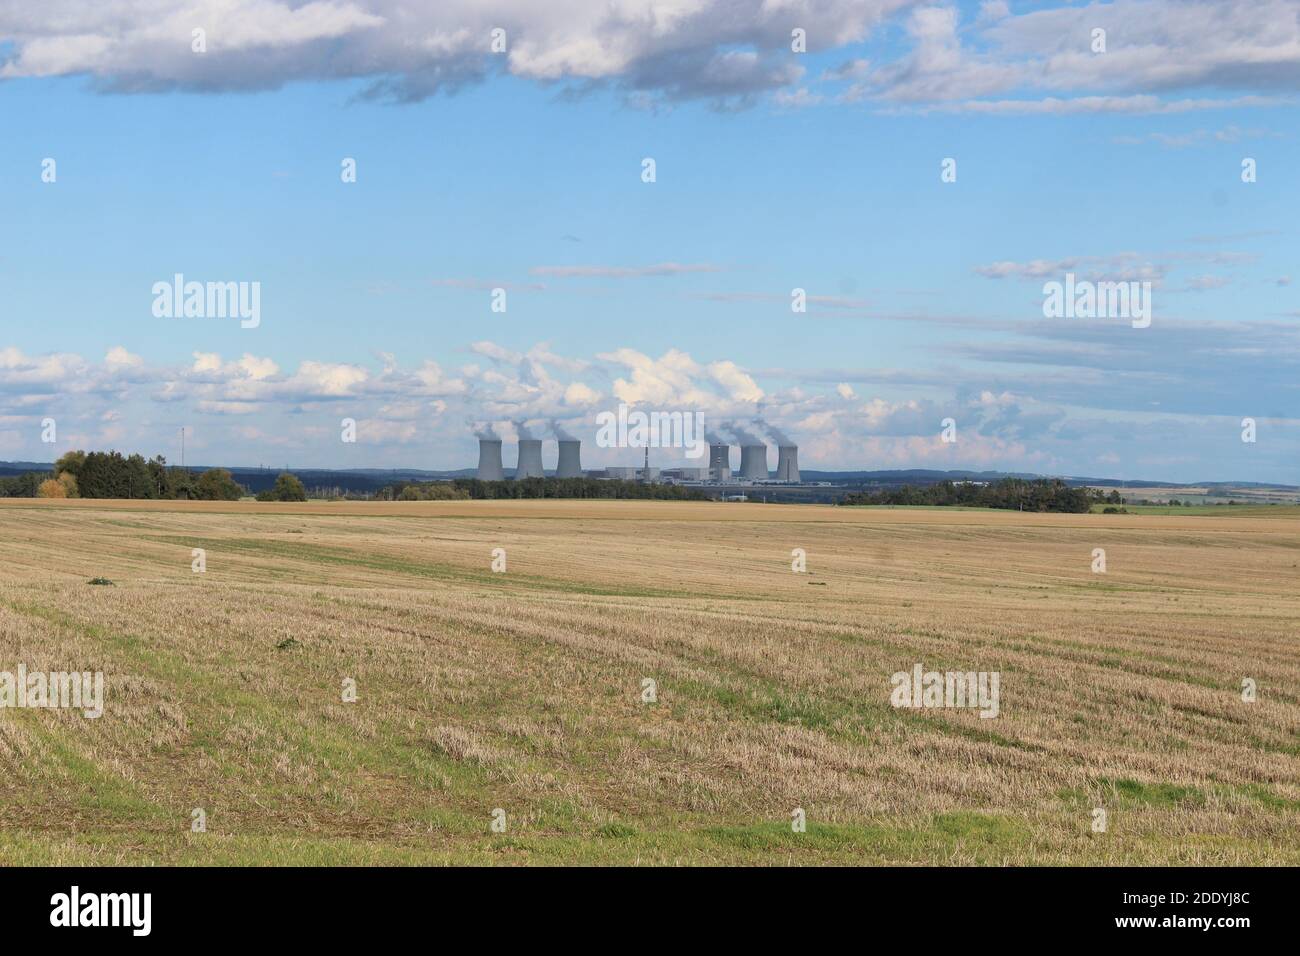 Dukovany Nuclear Power station in Moravia area of Czech Republic Stock Photo